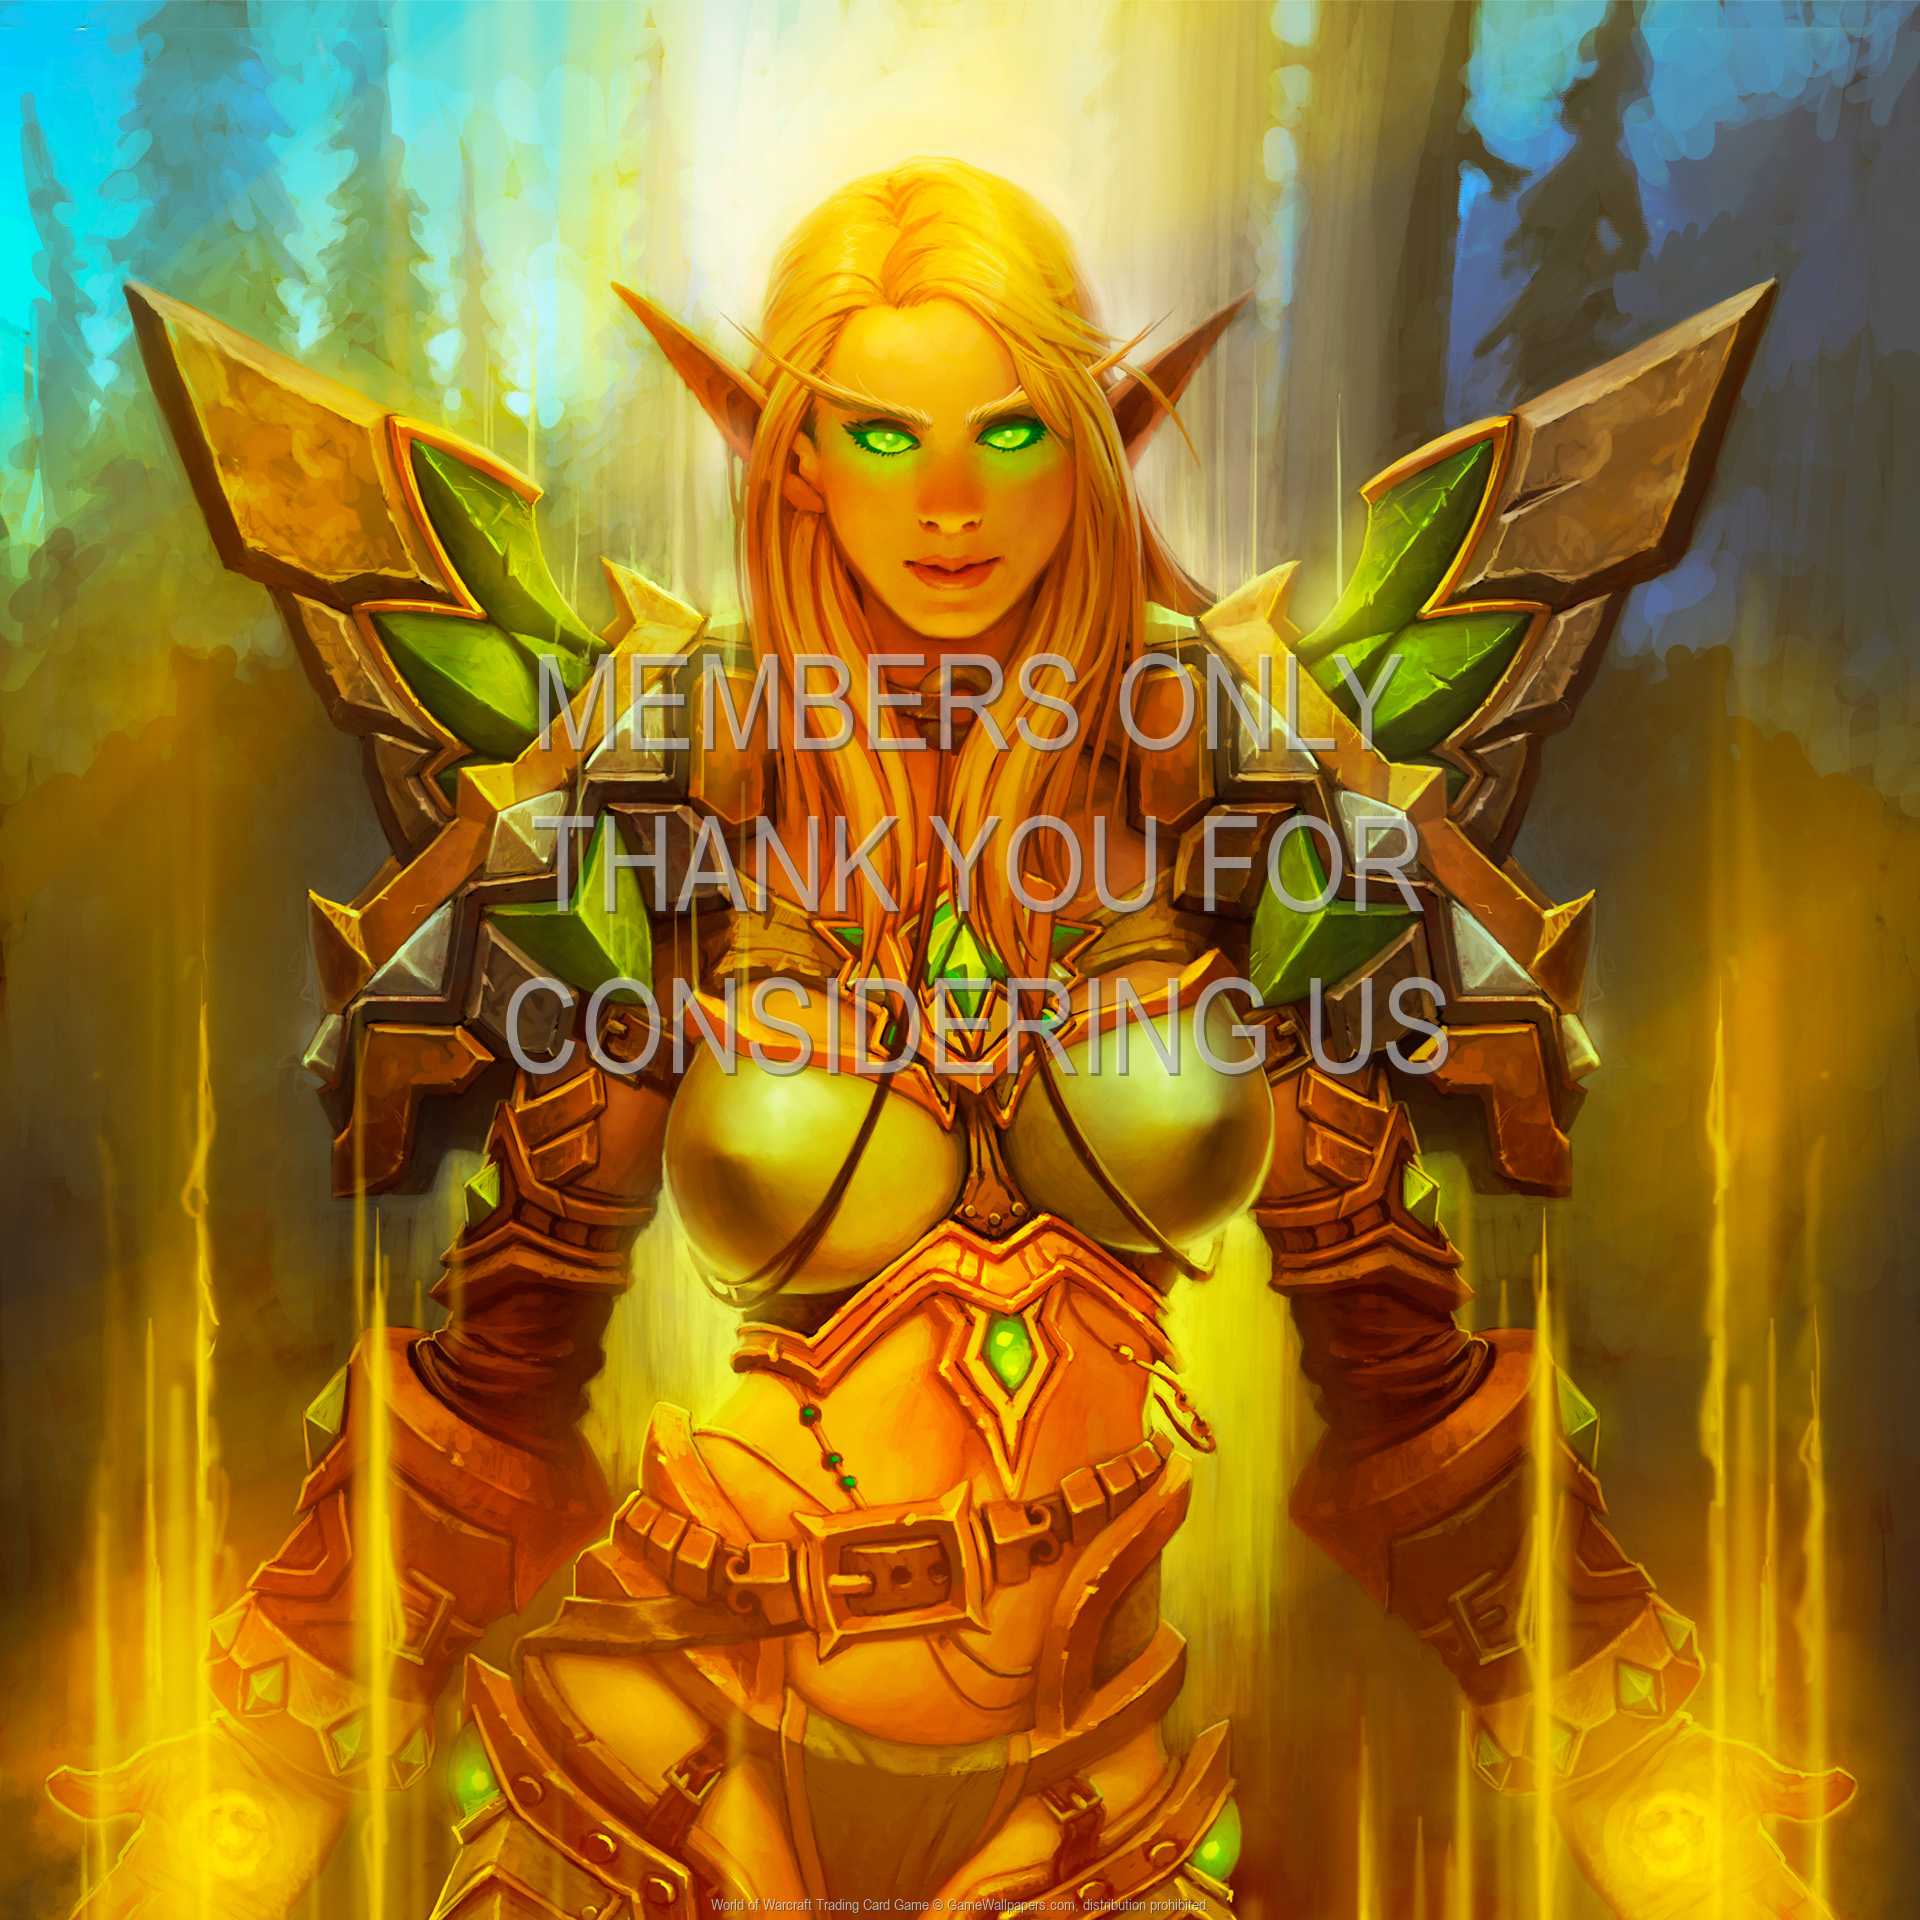 World of Warcraft: Trading Card Game 1080p Horizontal Mobile wallpaper or background 43